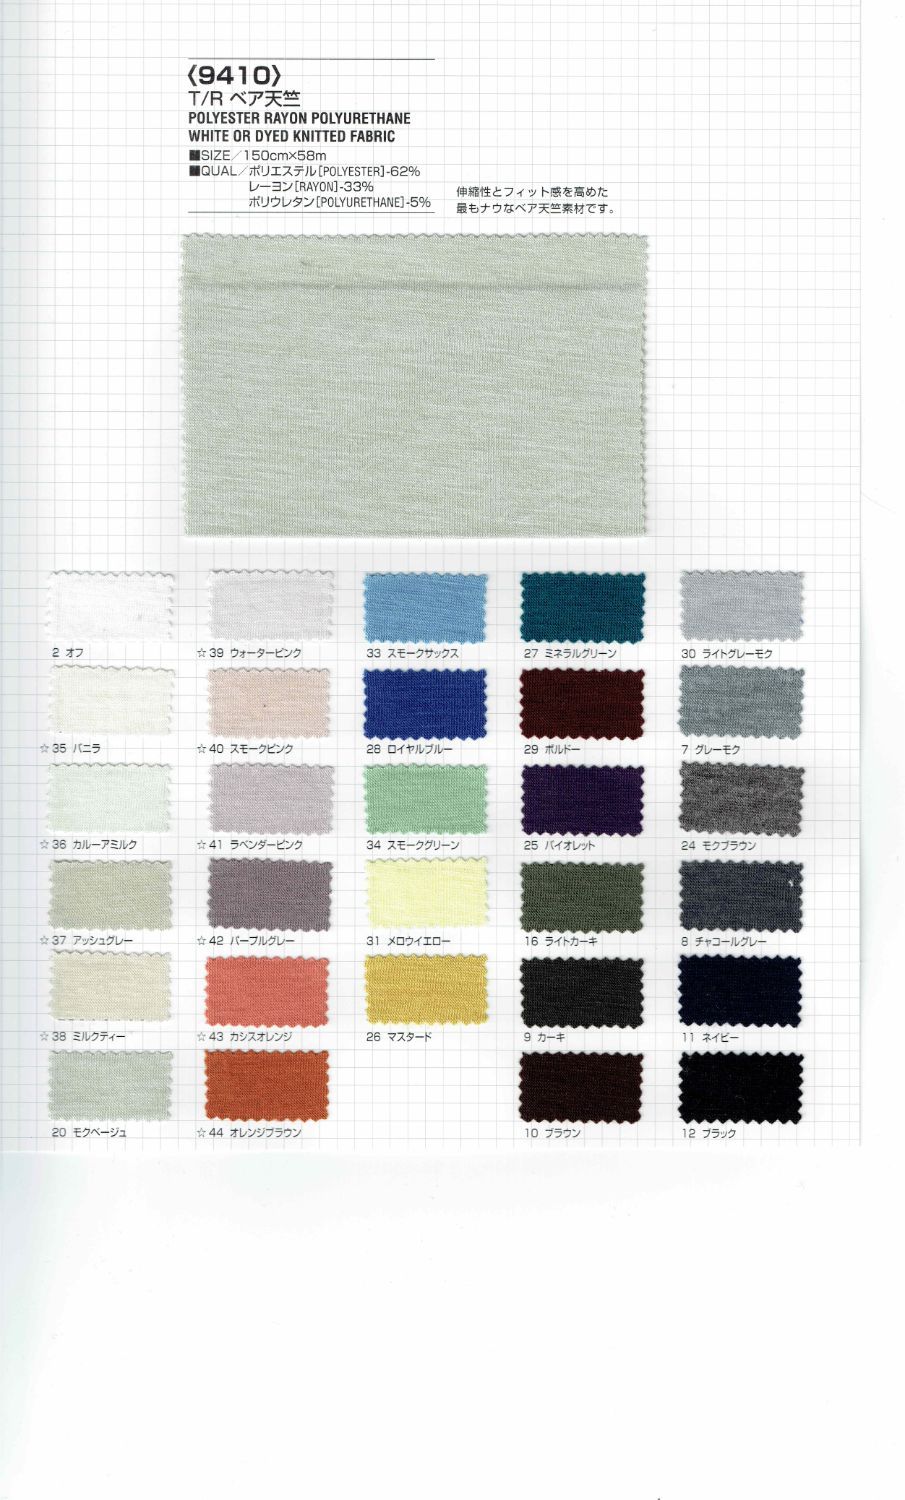 View 62% POLYESTER 33% RAYON 5% POLYURETHANE WHITE OR DYED KNITTED FABRIC